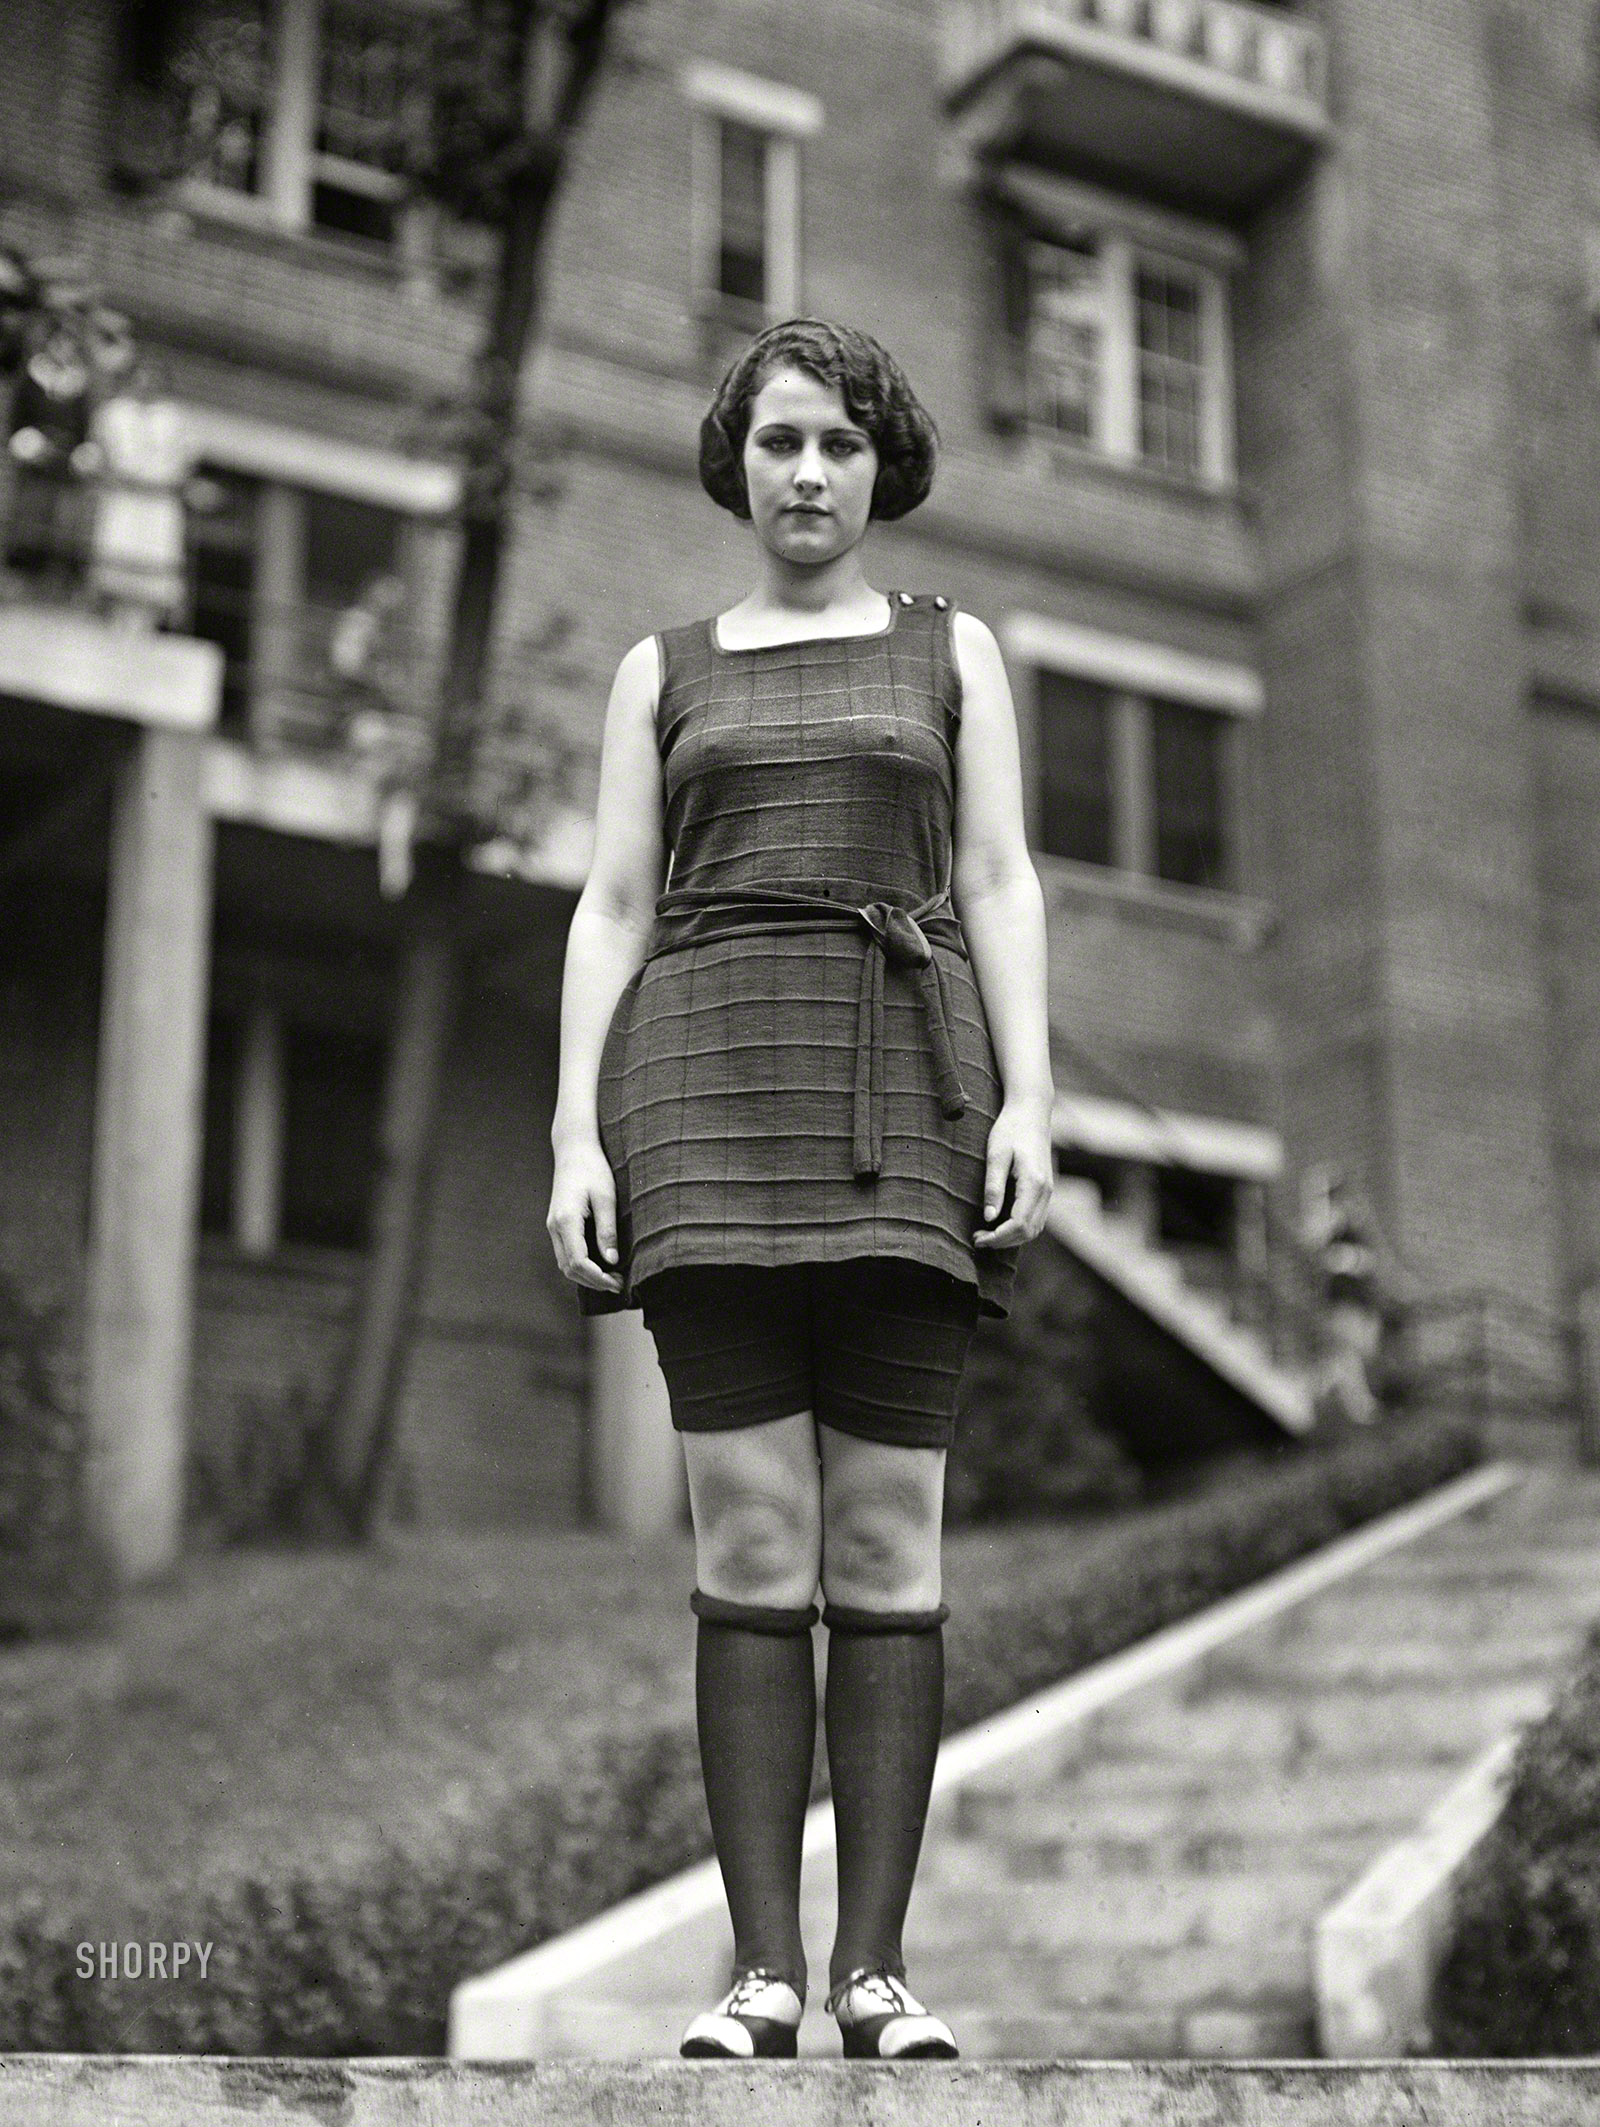 1922. "Miss Washington in bathing suit." Concealed yet revealed, Evelyn Lewis at the Wardman Park Hotel pool on a nippy day. Harris & Ewing. View full size.